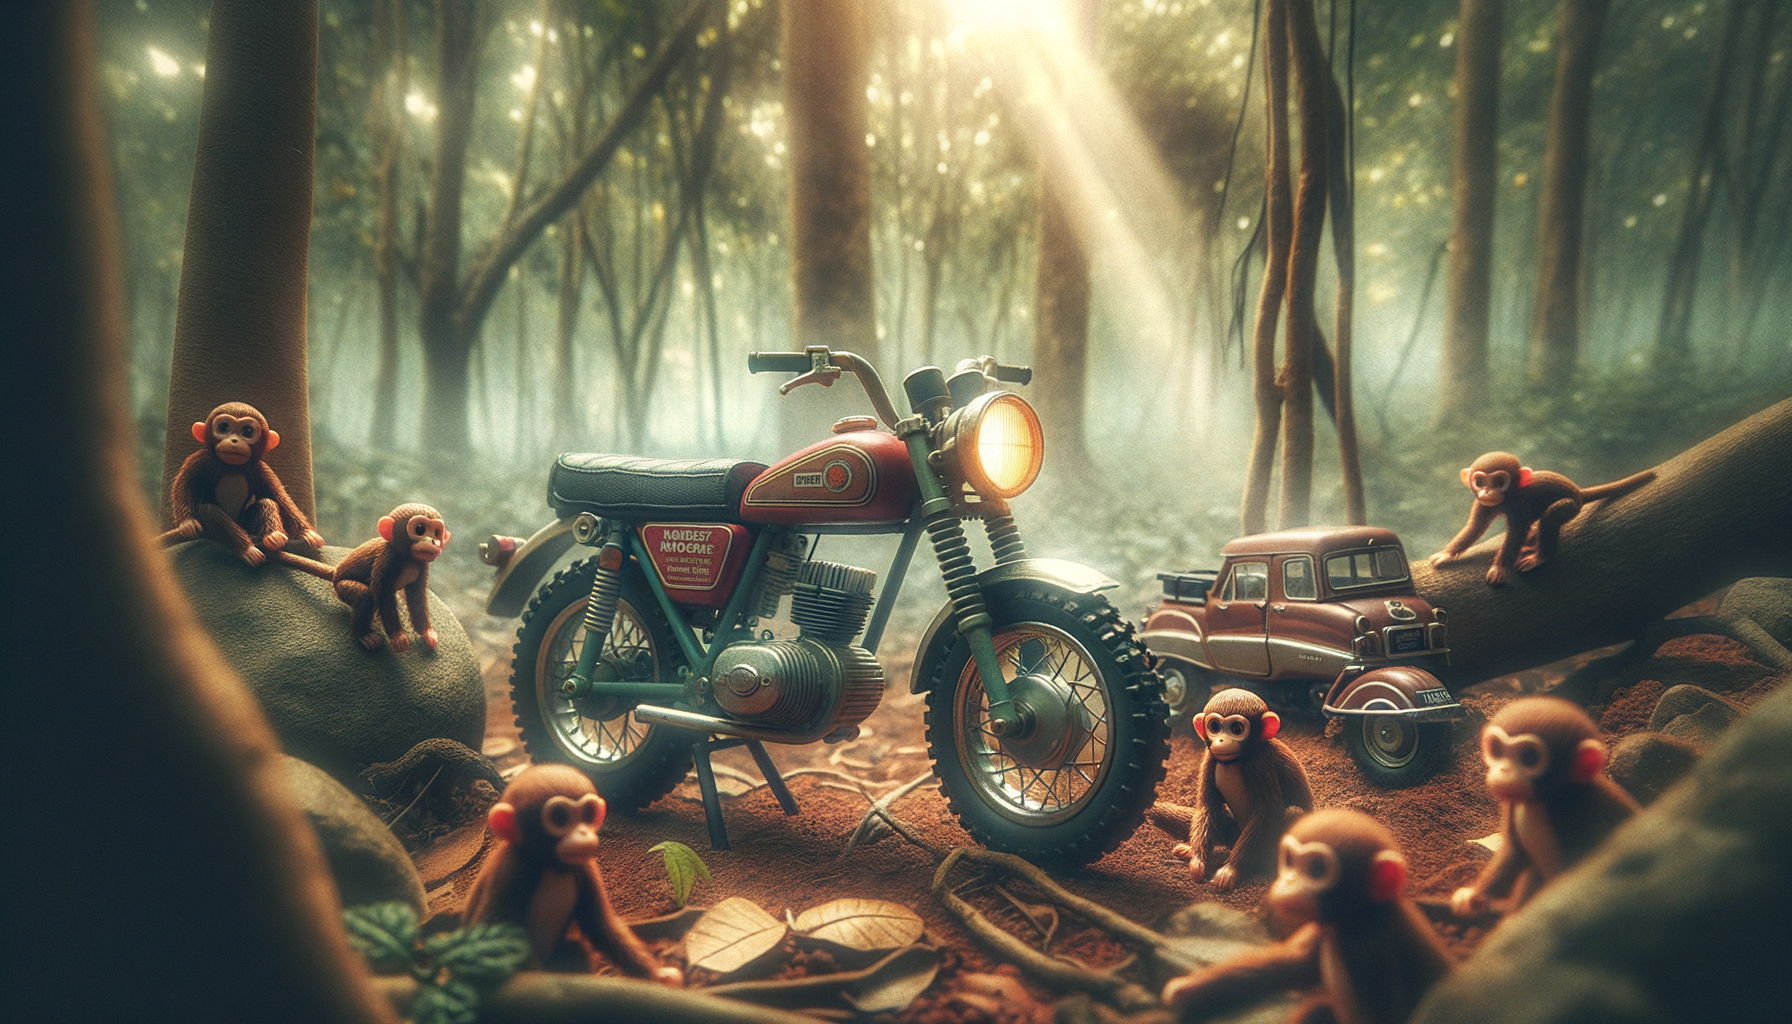 explore the iconic monkey magic with the original 1971 honda z50a k2 mini trail. discover the history, specs, and more.